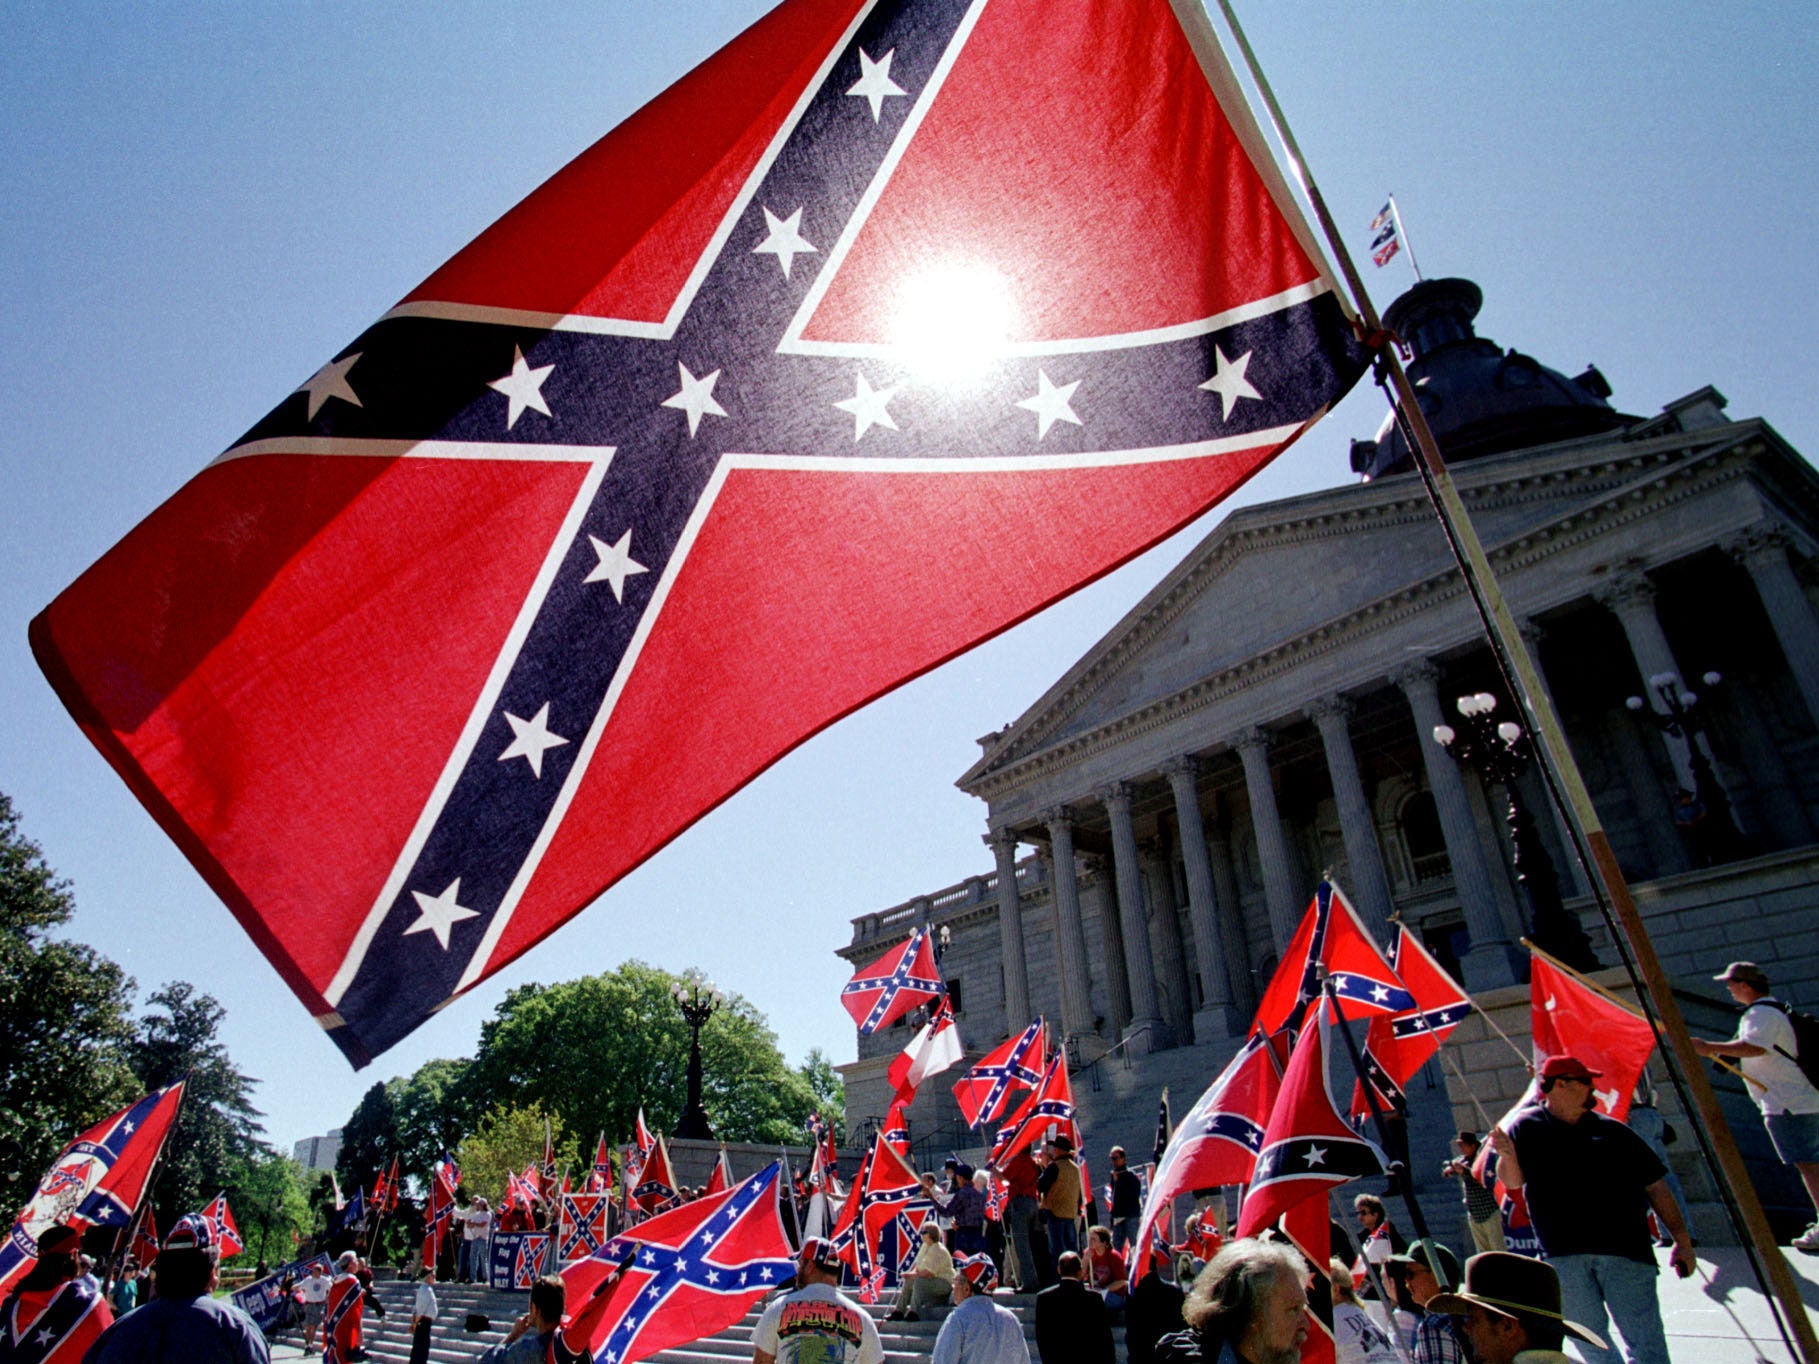 Confederate flag supporters protested in 2000 to keep the flag outside South Carolina's state house